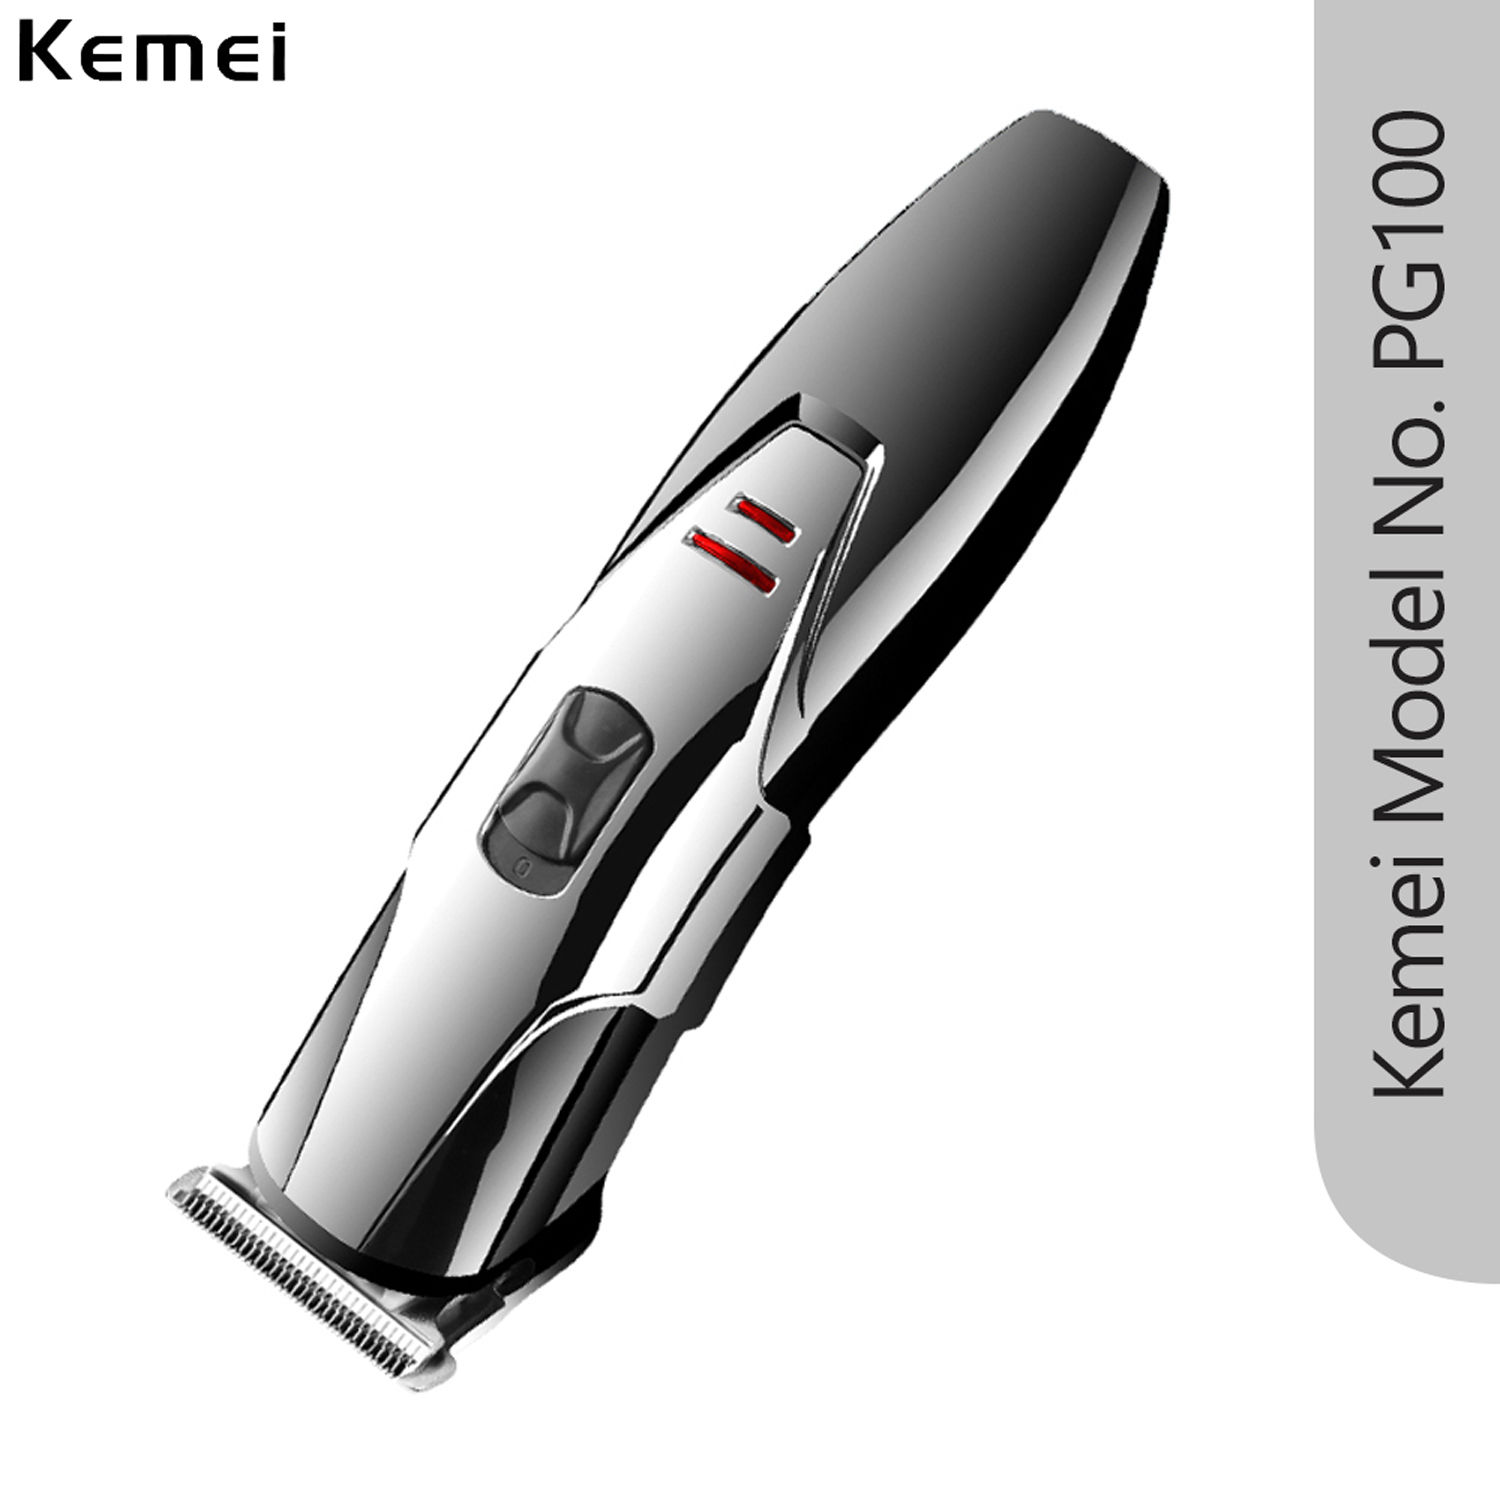 https://media6.ppl-media.com//tr:h-750,w-750,c-at_max,dpr-2/static/img/product/308229/kemei-km-pg100-rechargeable-cordless-trimmer-for-men-multicolor_6_display_1660455632_6113b911.jpg